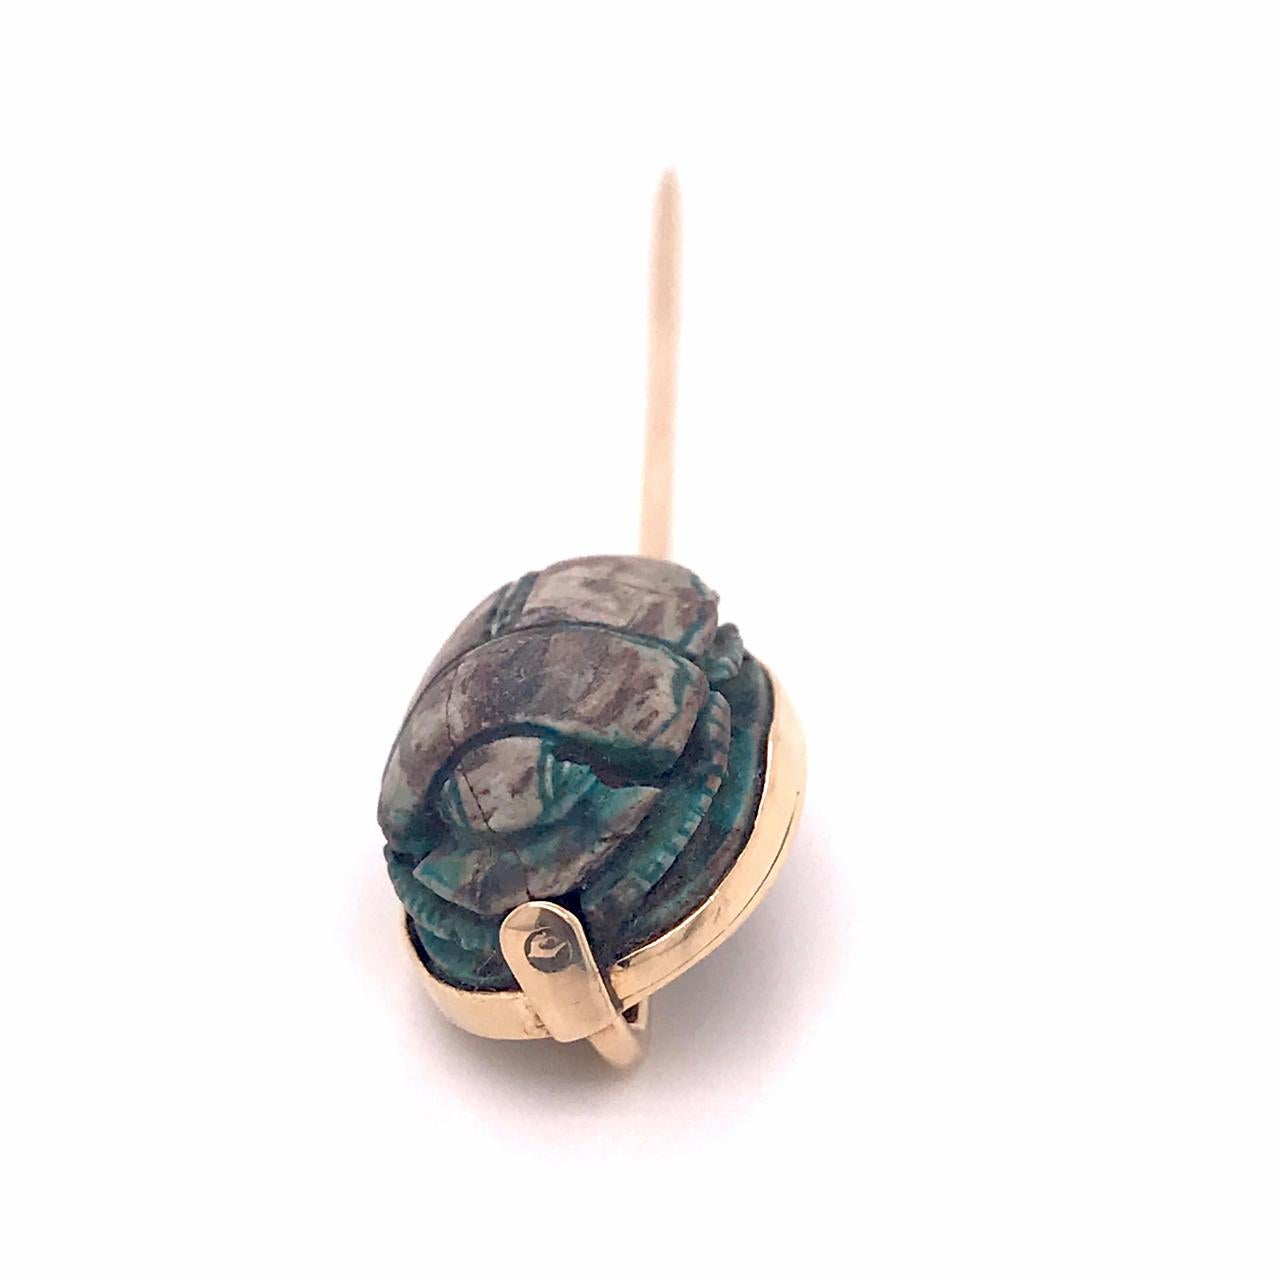 Antique Egyptian Revival Faience Scarab & 14 Karat Gold Stick Pin For Sale 3